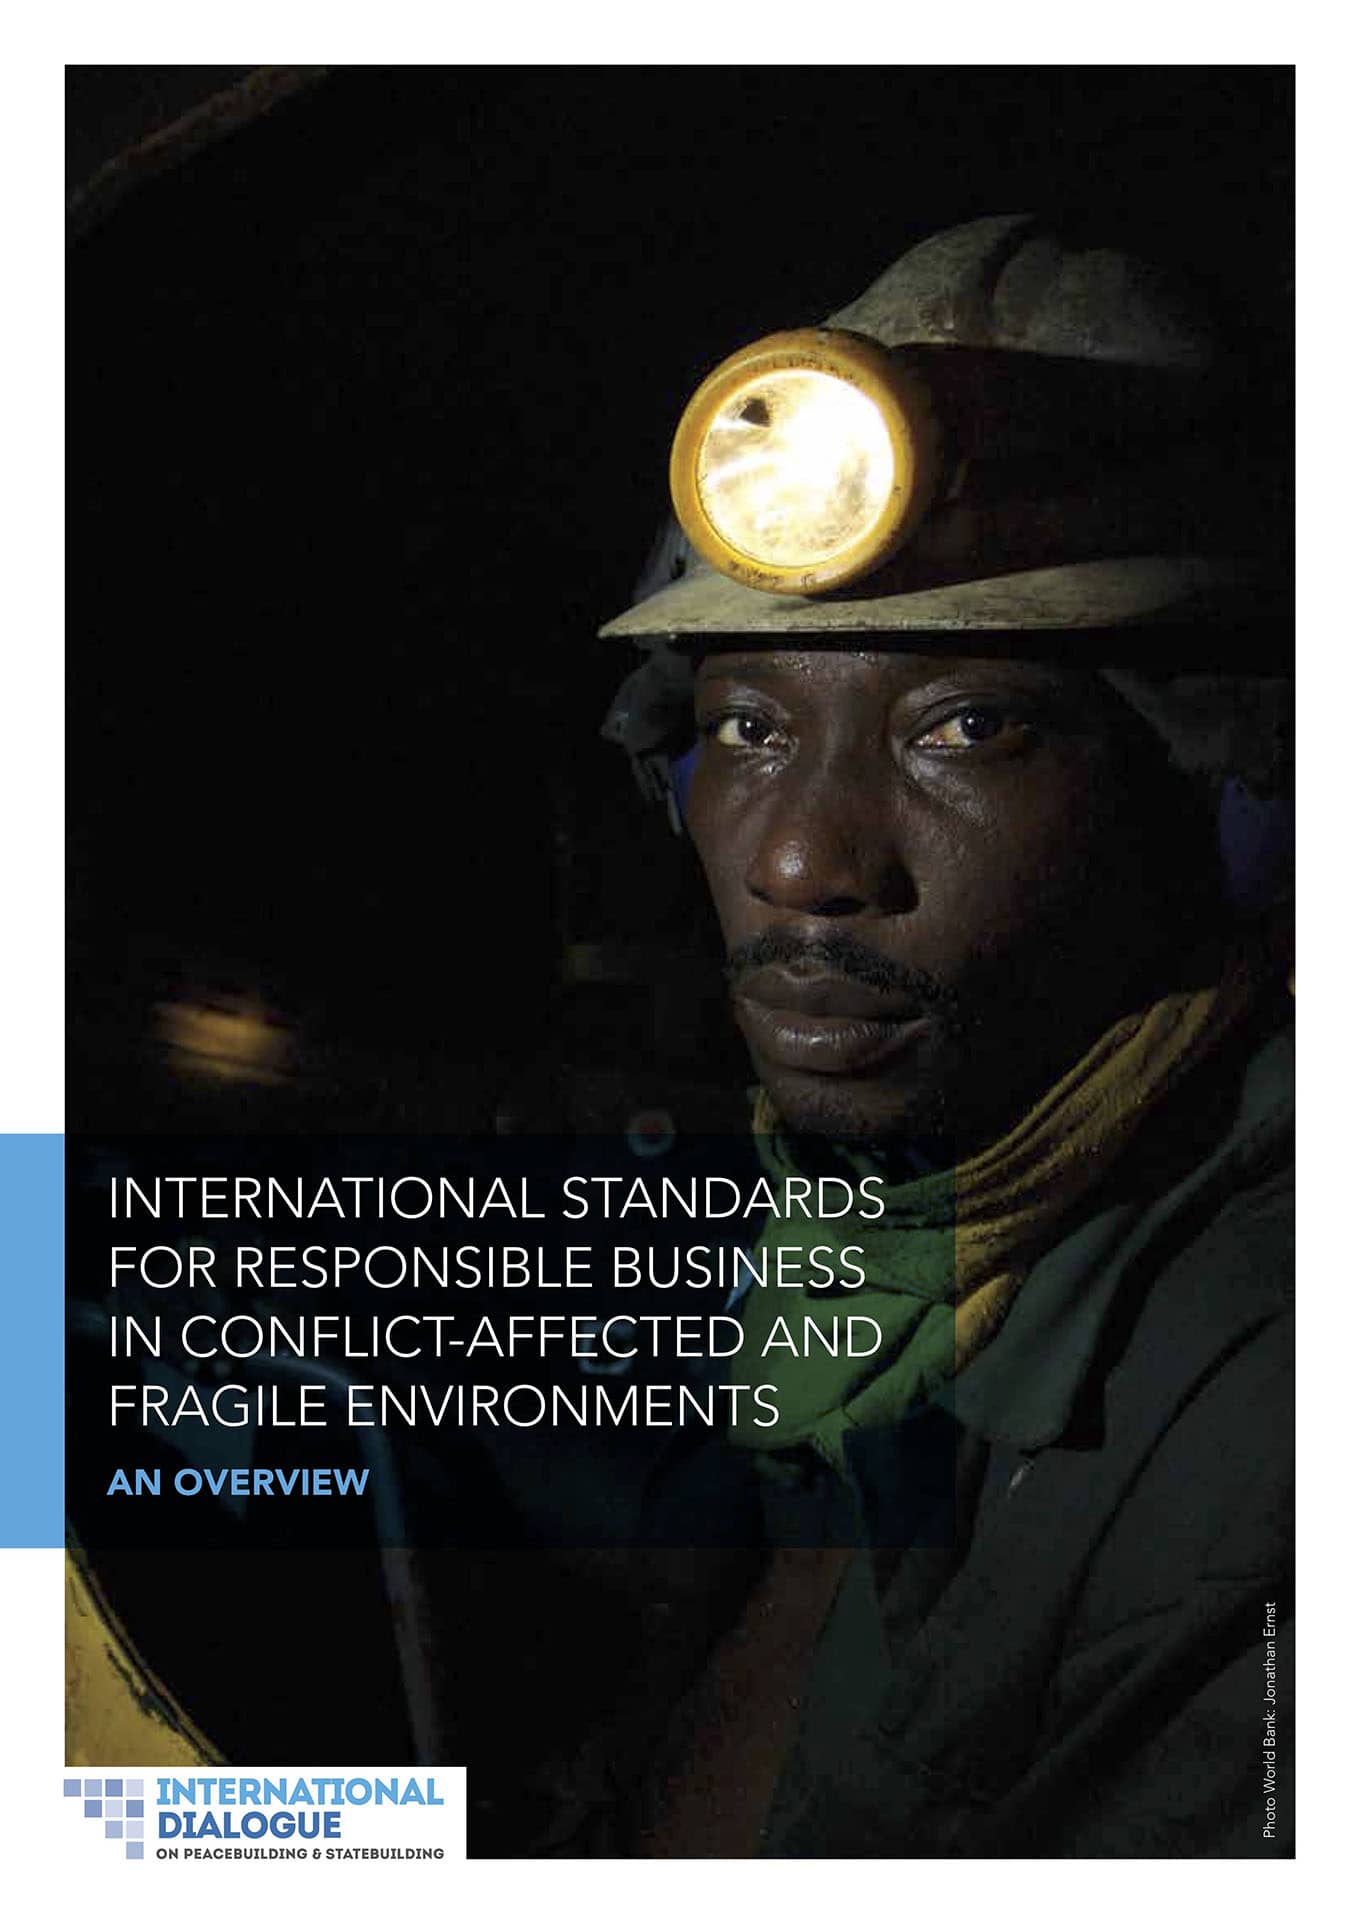 International Standards for Responsible Business in Conflict-Affected and Fragile Environments: An Overview